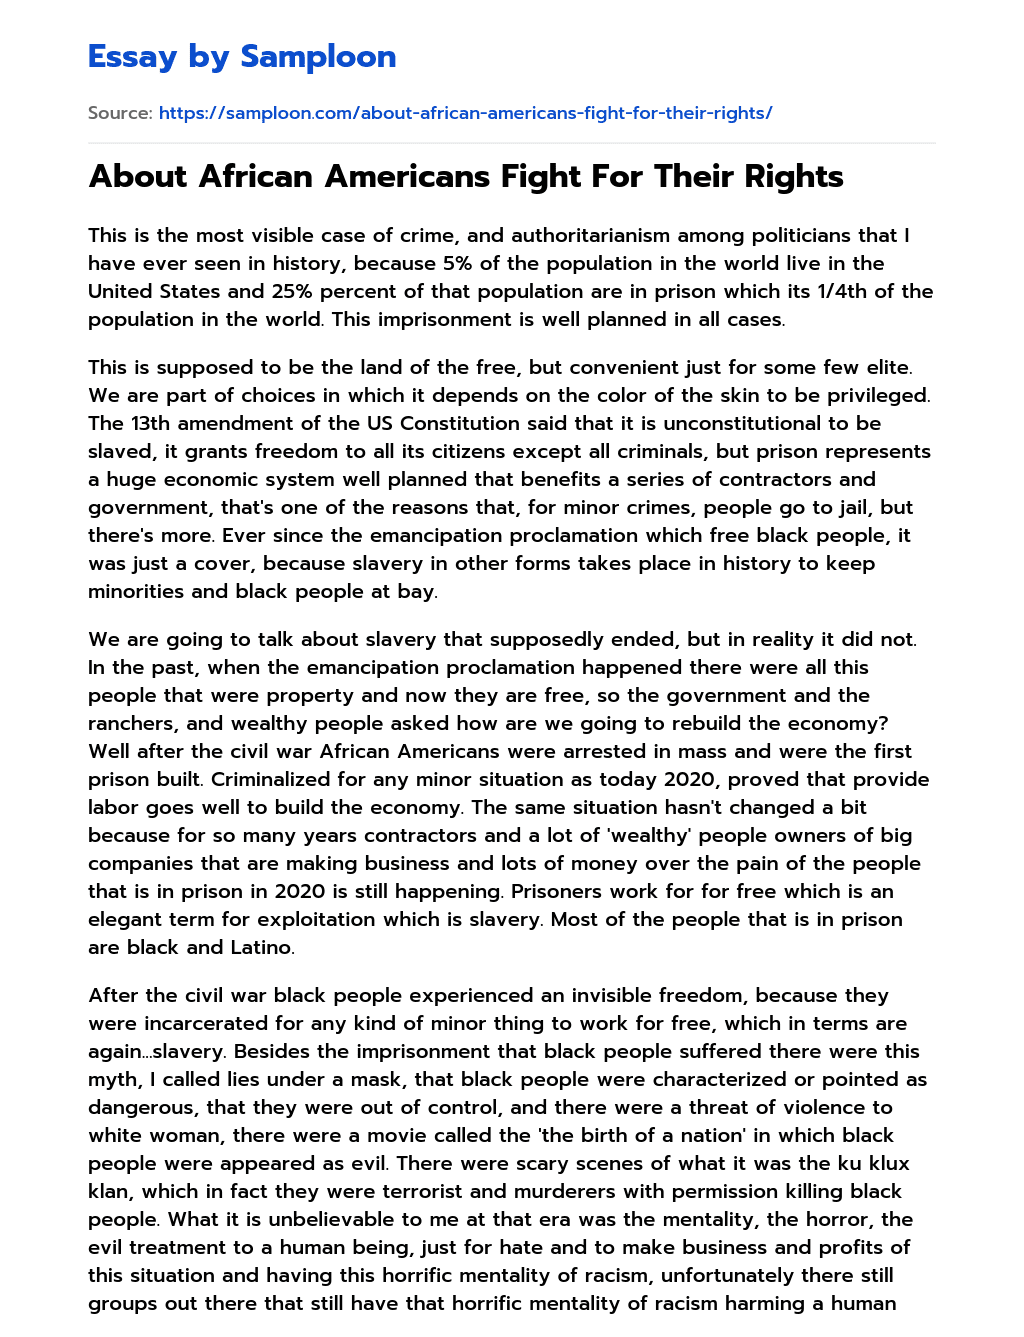 About African Americans Fight For Their Rights essay